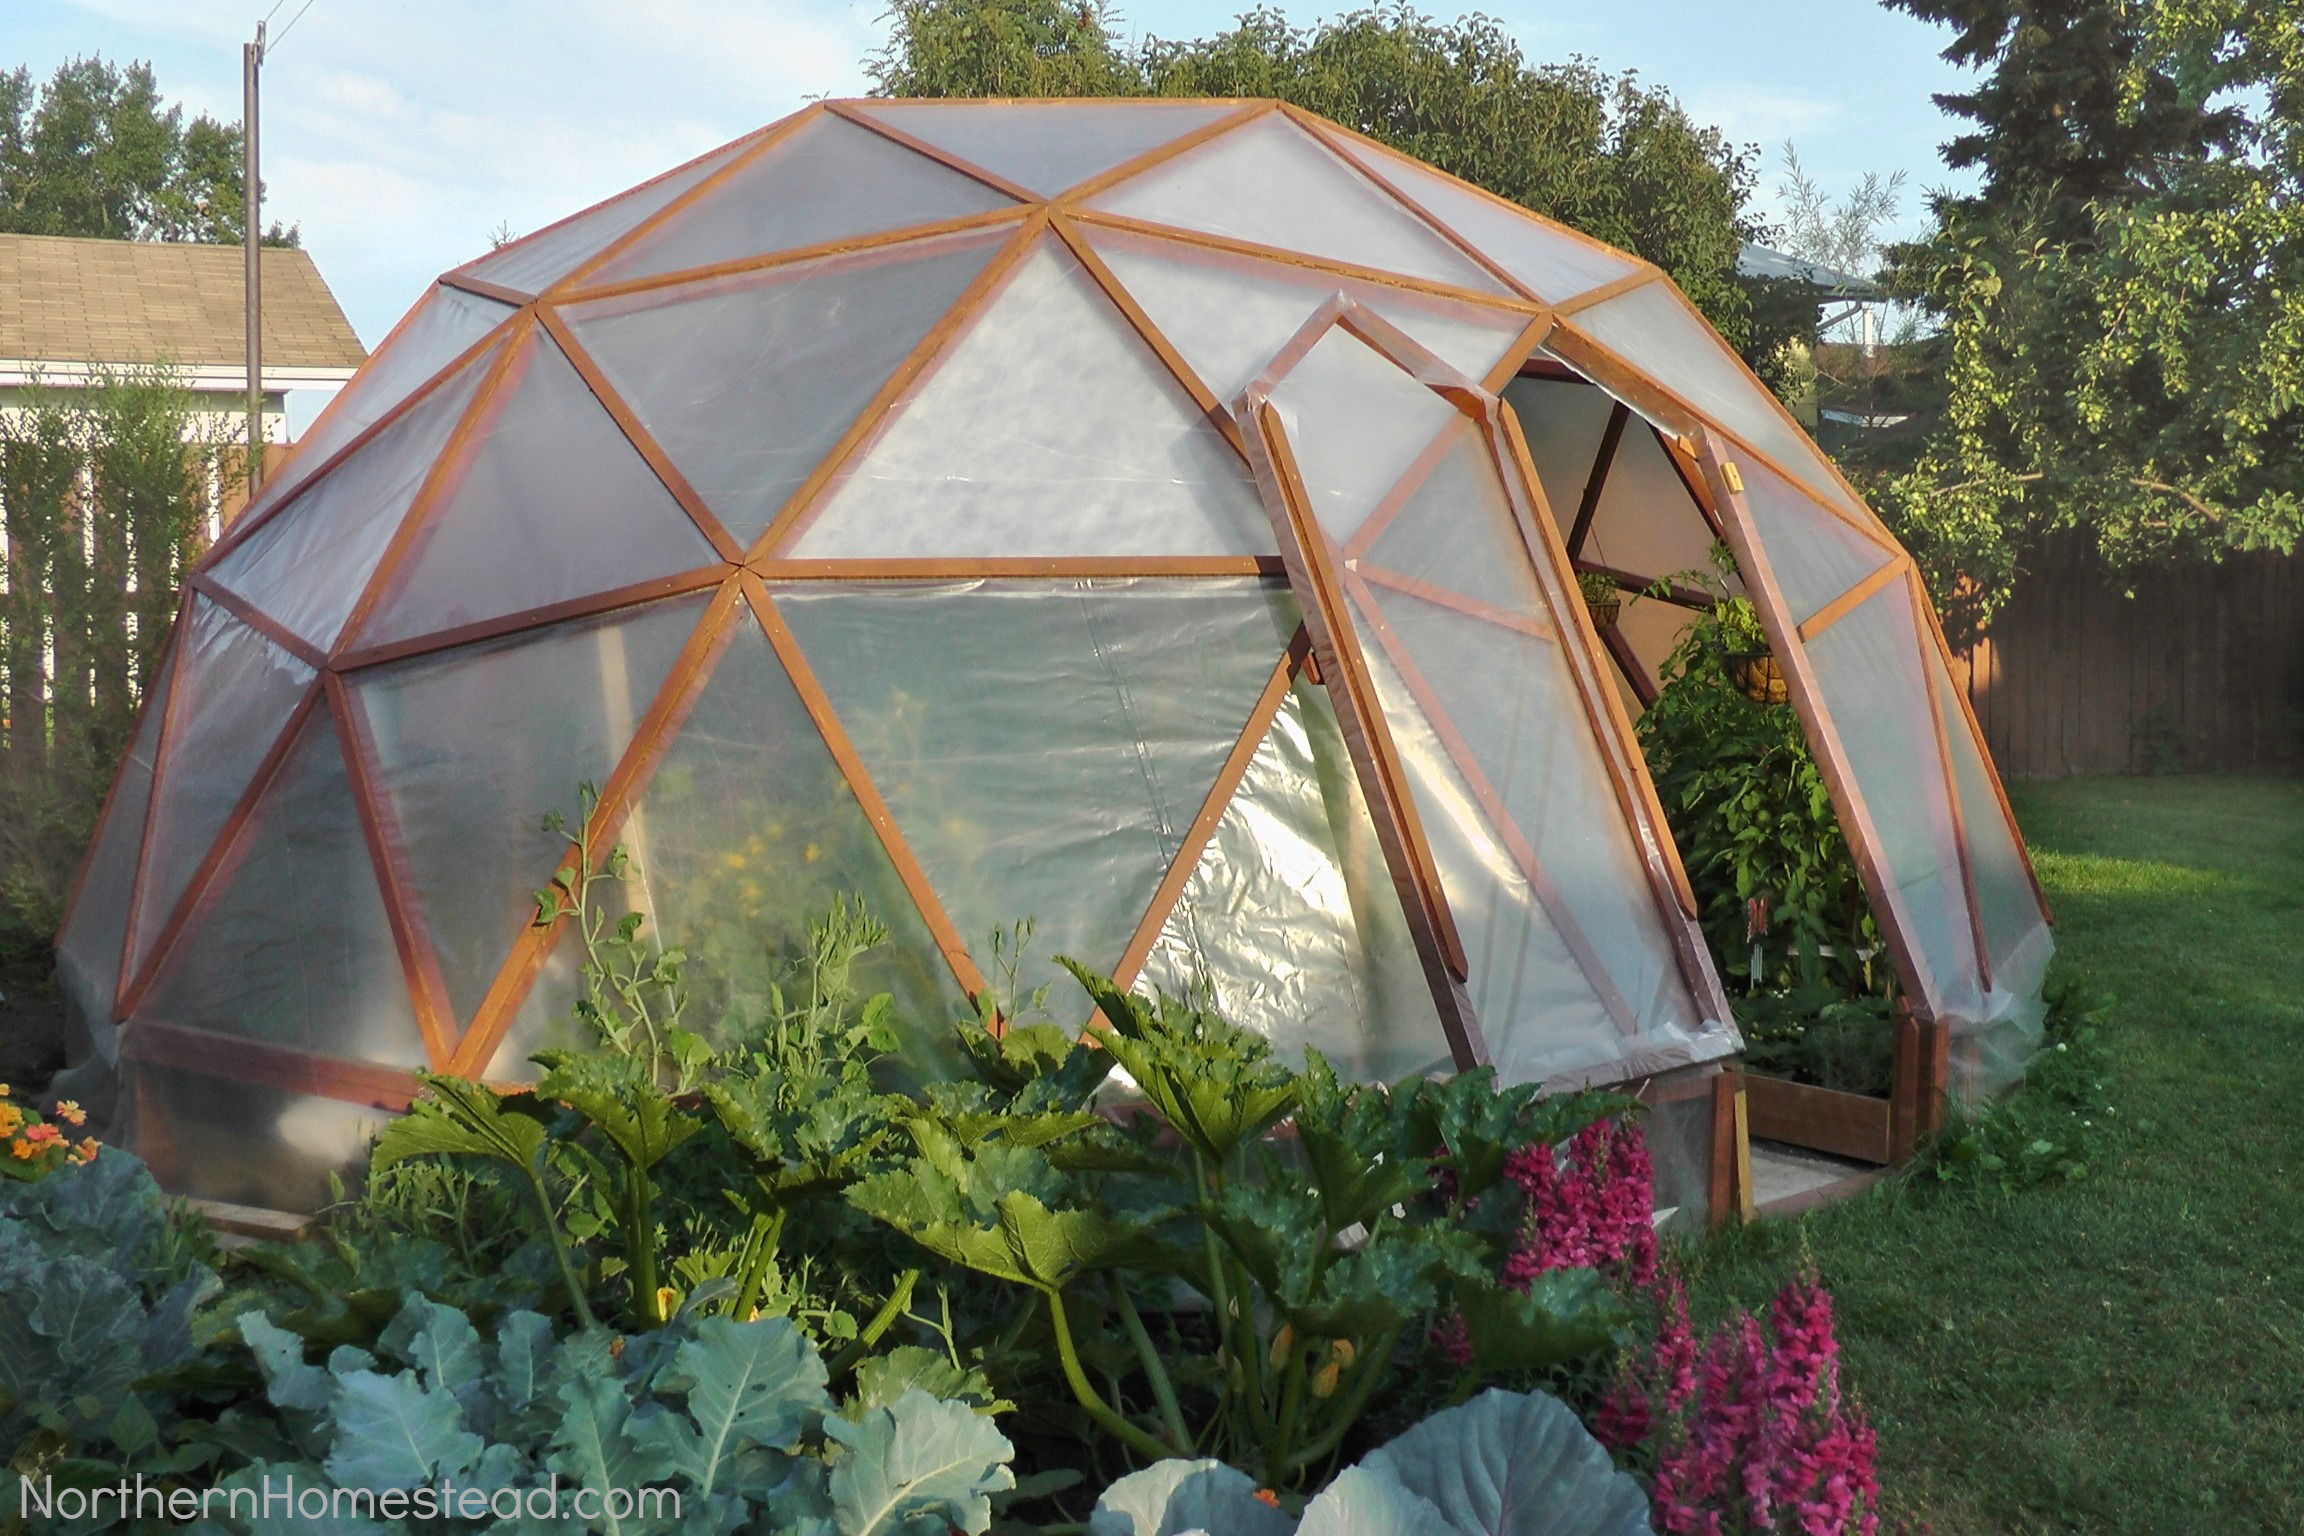 How to Build a Geodome Greenhouse